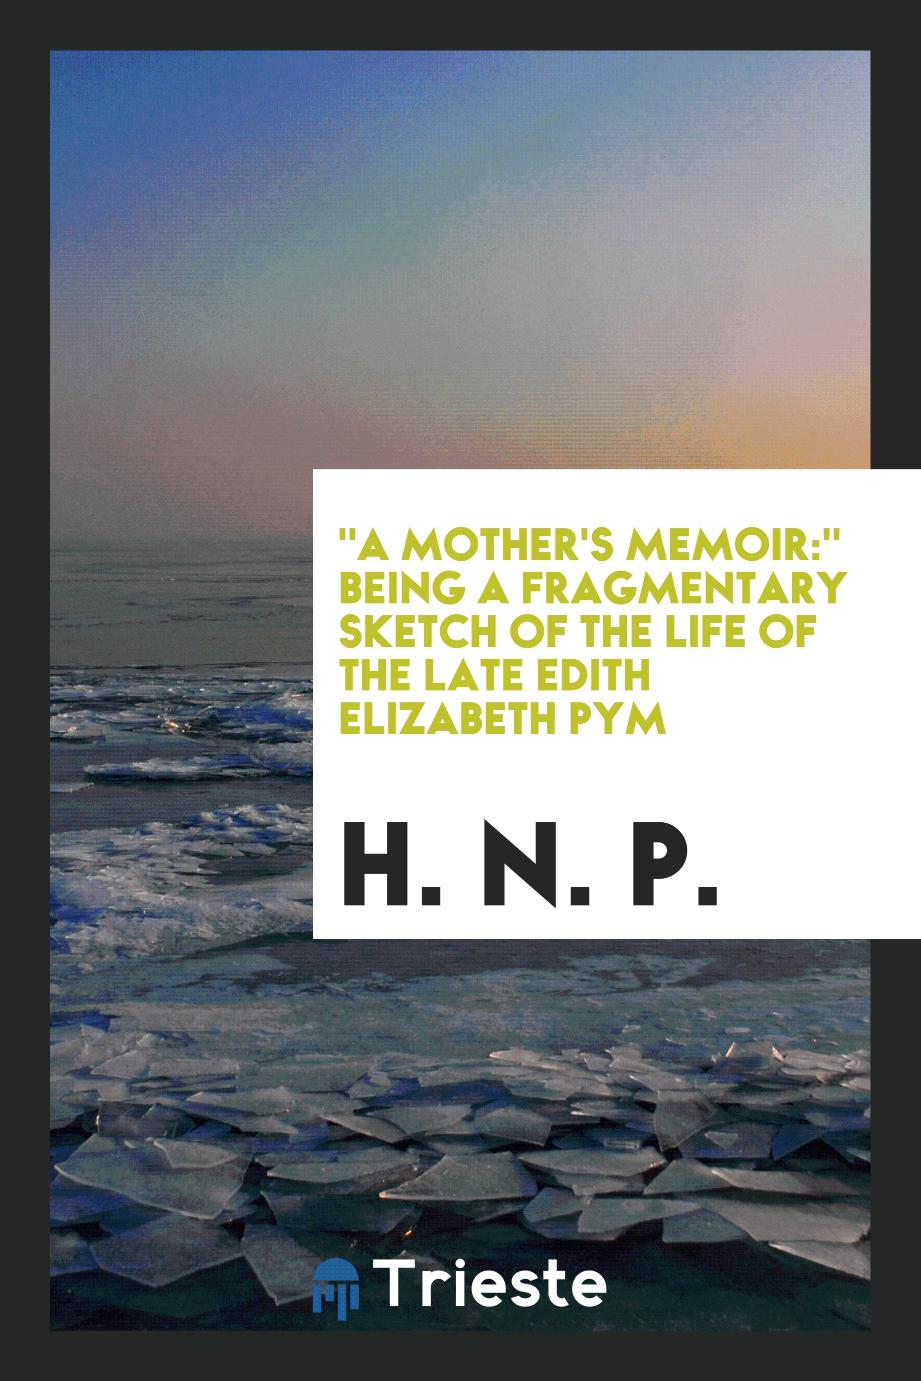 "A Mother's Memoir:" Being a Fragmentary Sketch of the Life of the Late Edith Elizabeth Pym